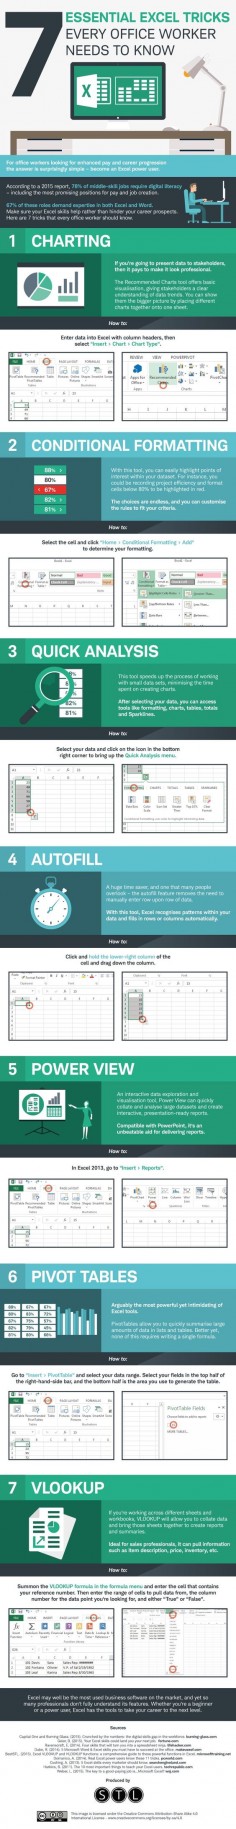 7 Essential Excel Tricks Every Office Worker Should Know - #infographic